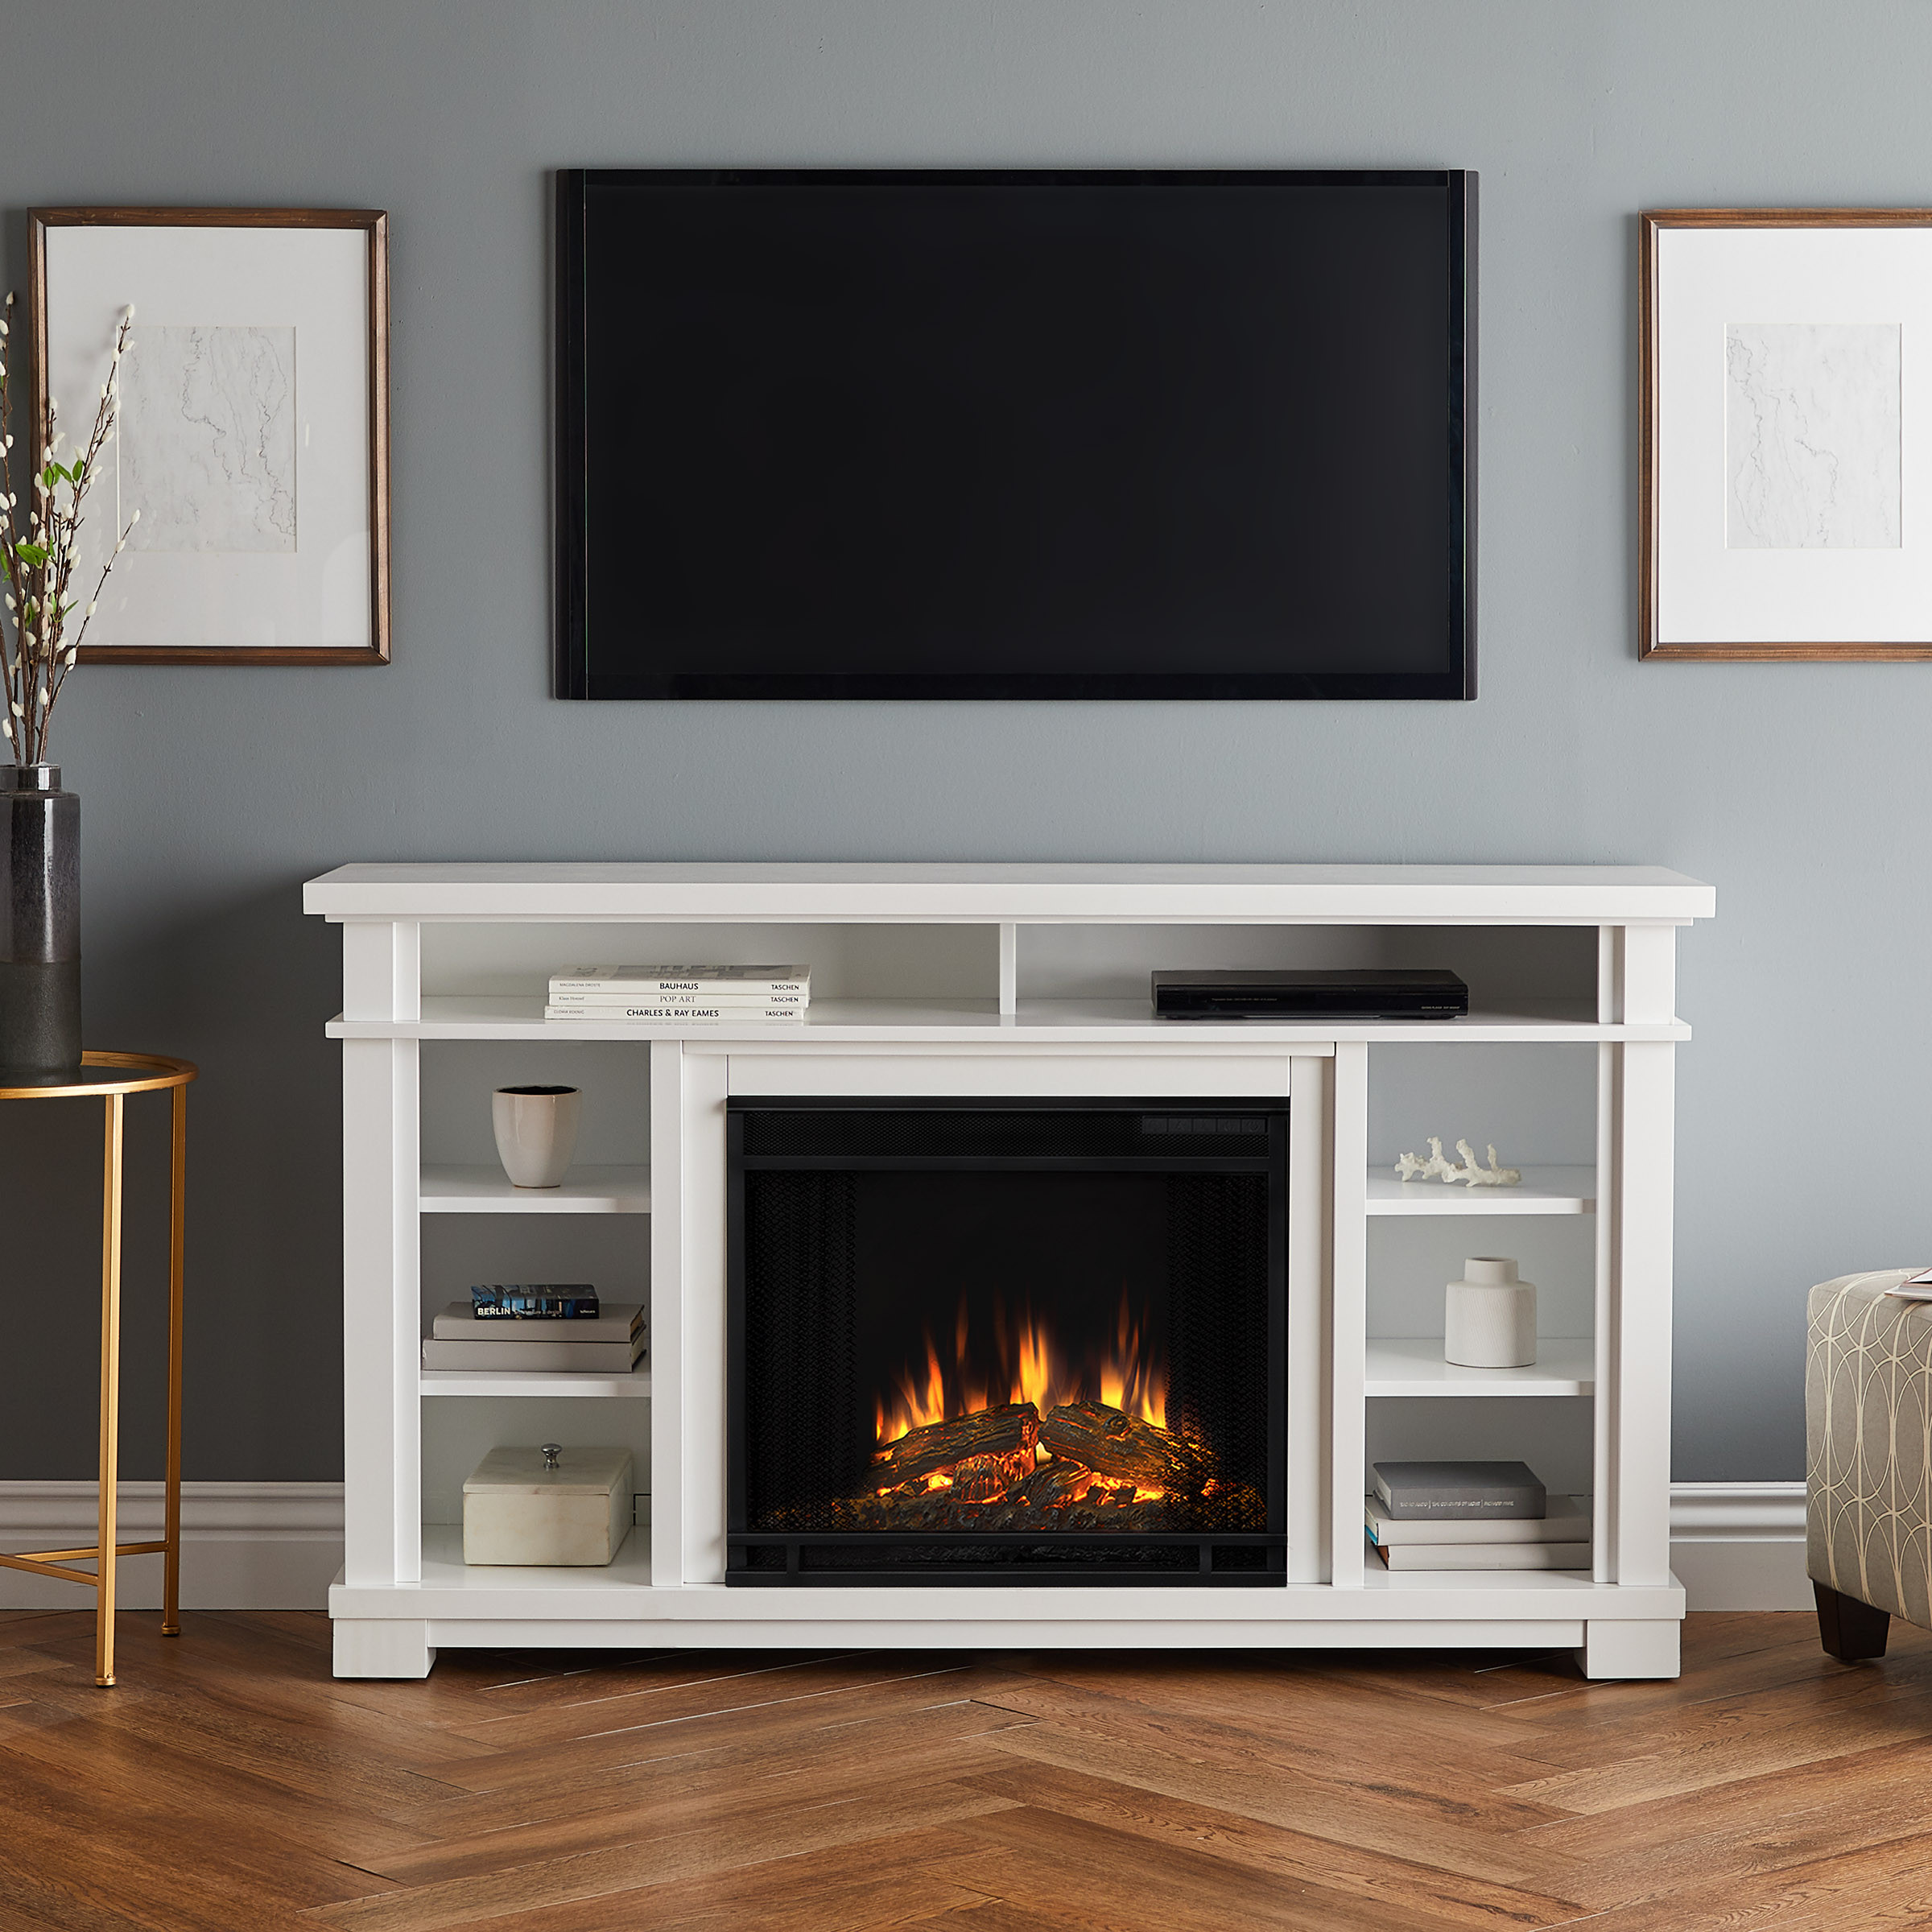 Real Flame White Electric Fireplace
 Belford Electric Fireplace in White by Real Flame